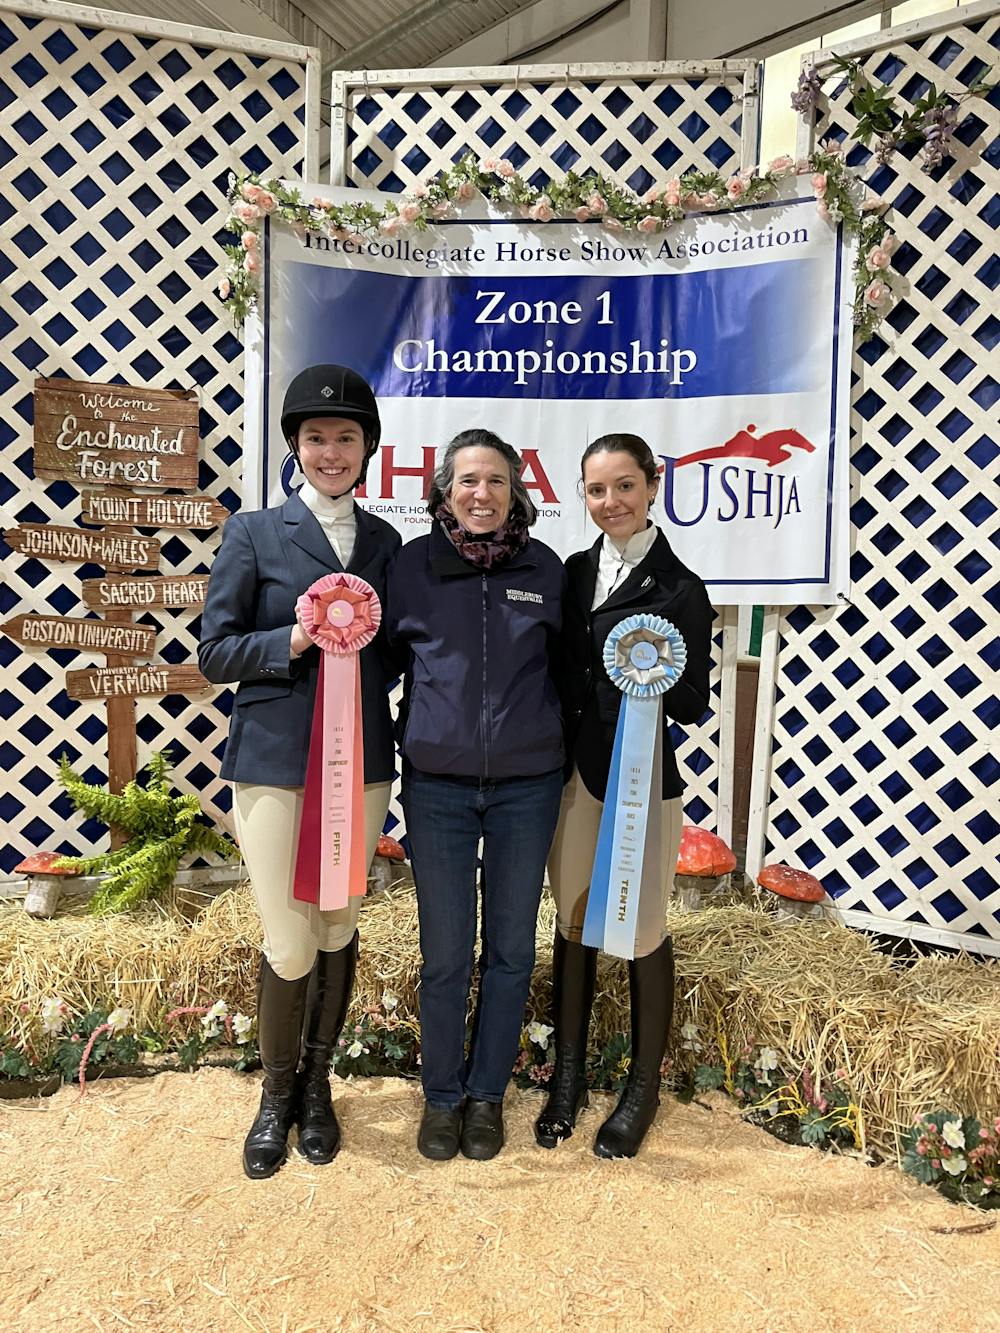 Middlebury equestrian team riders Anika Jessup ’23 and Sage Mauri ’23 with coach Kate Selby at the Zone 1 Championship.